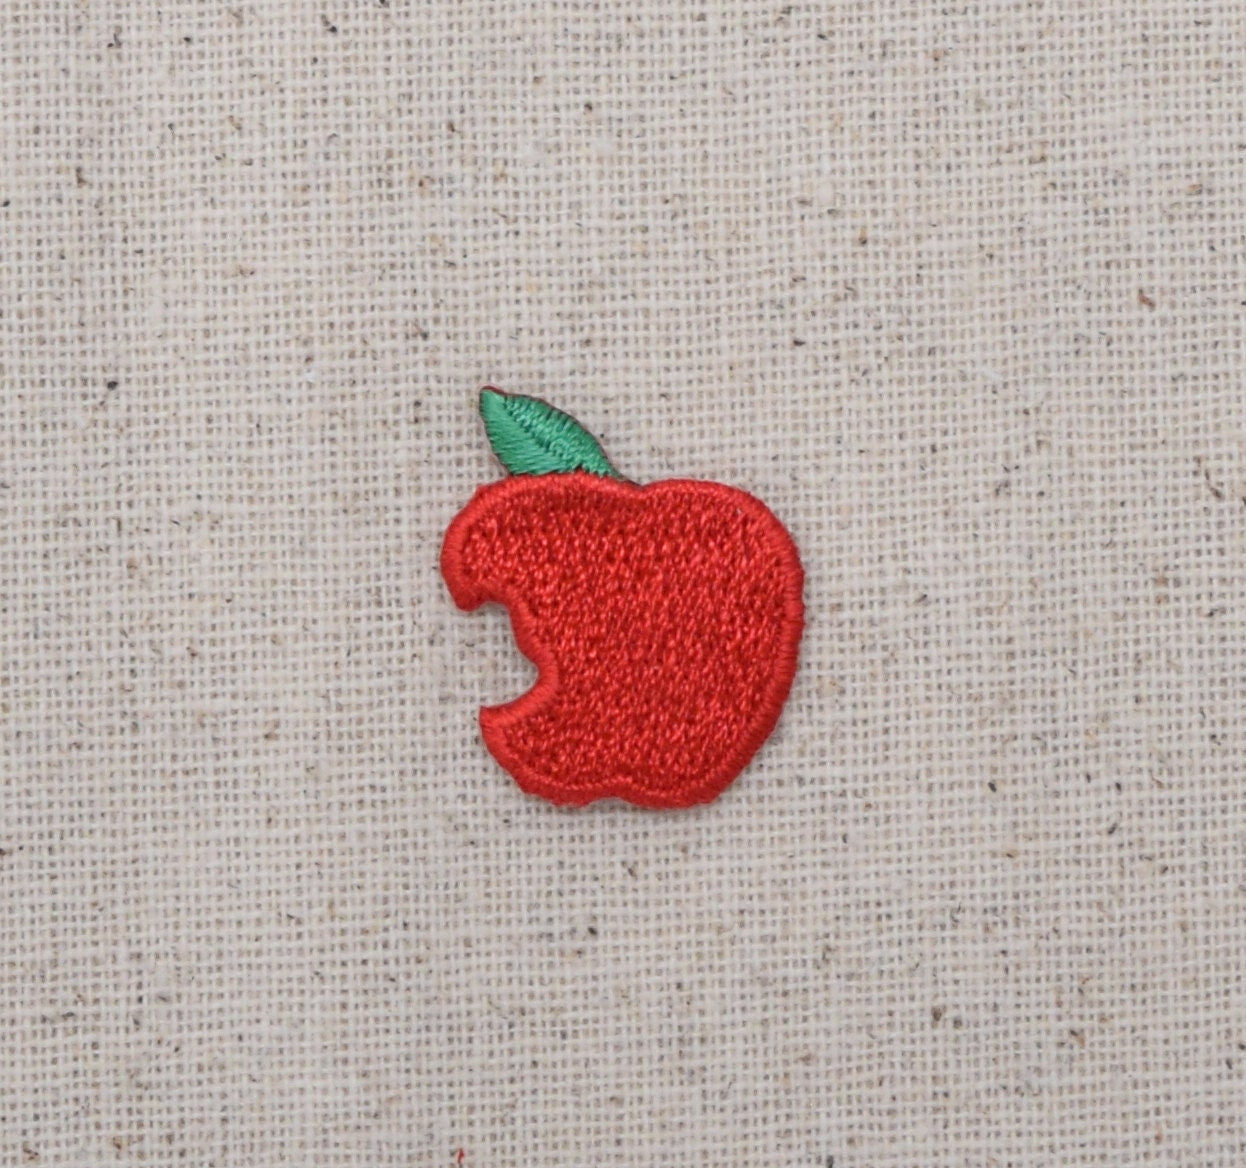 Red Apple - Fruit - Food - Missing a Bite - Iron on Applique - Embroidered Patch - AP-511881